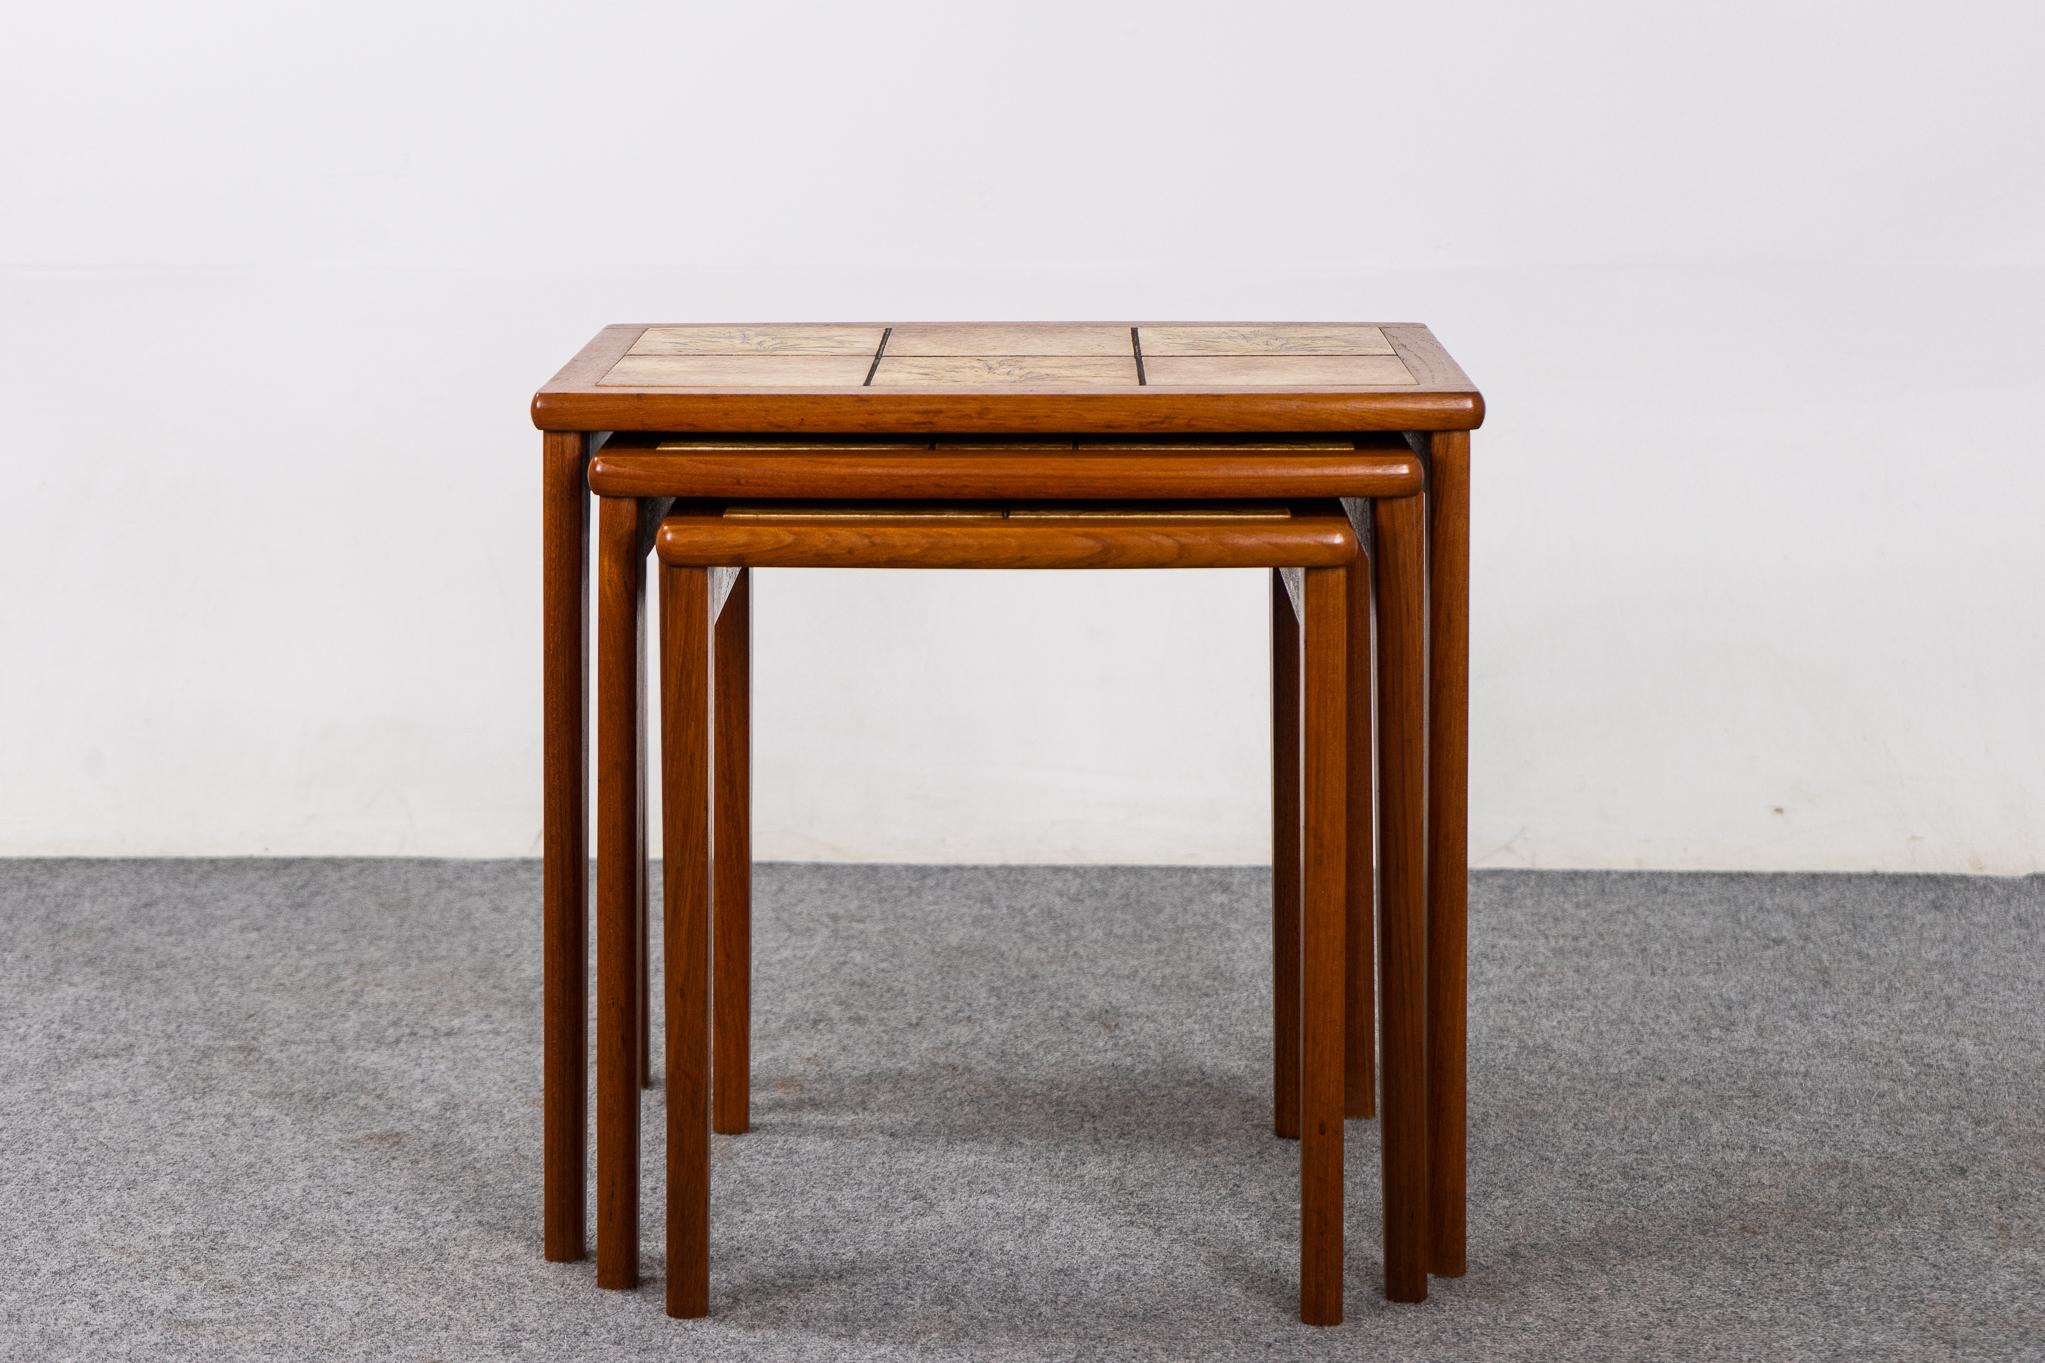 Teak and tile Danish nesting tables, circa 1970's. Space saving design offers the footprint of one table, with the functionality of three! Highly functional and charmingly nostalgic wheat motif tiles act as built it coasters. Darling!.

Make the